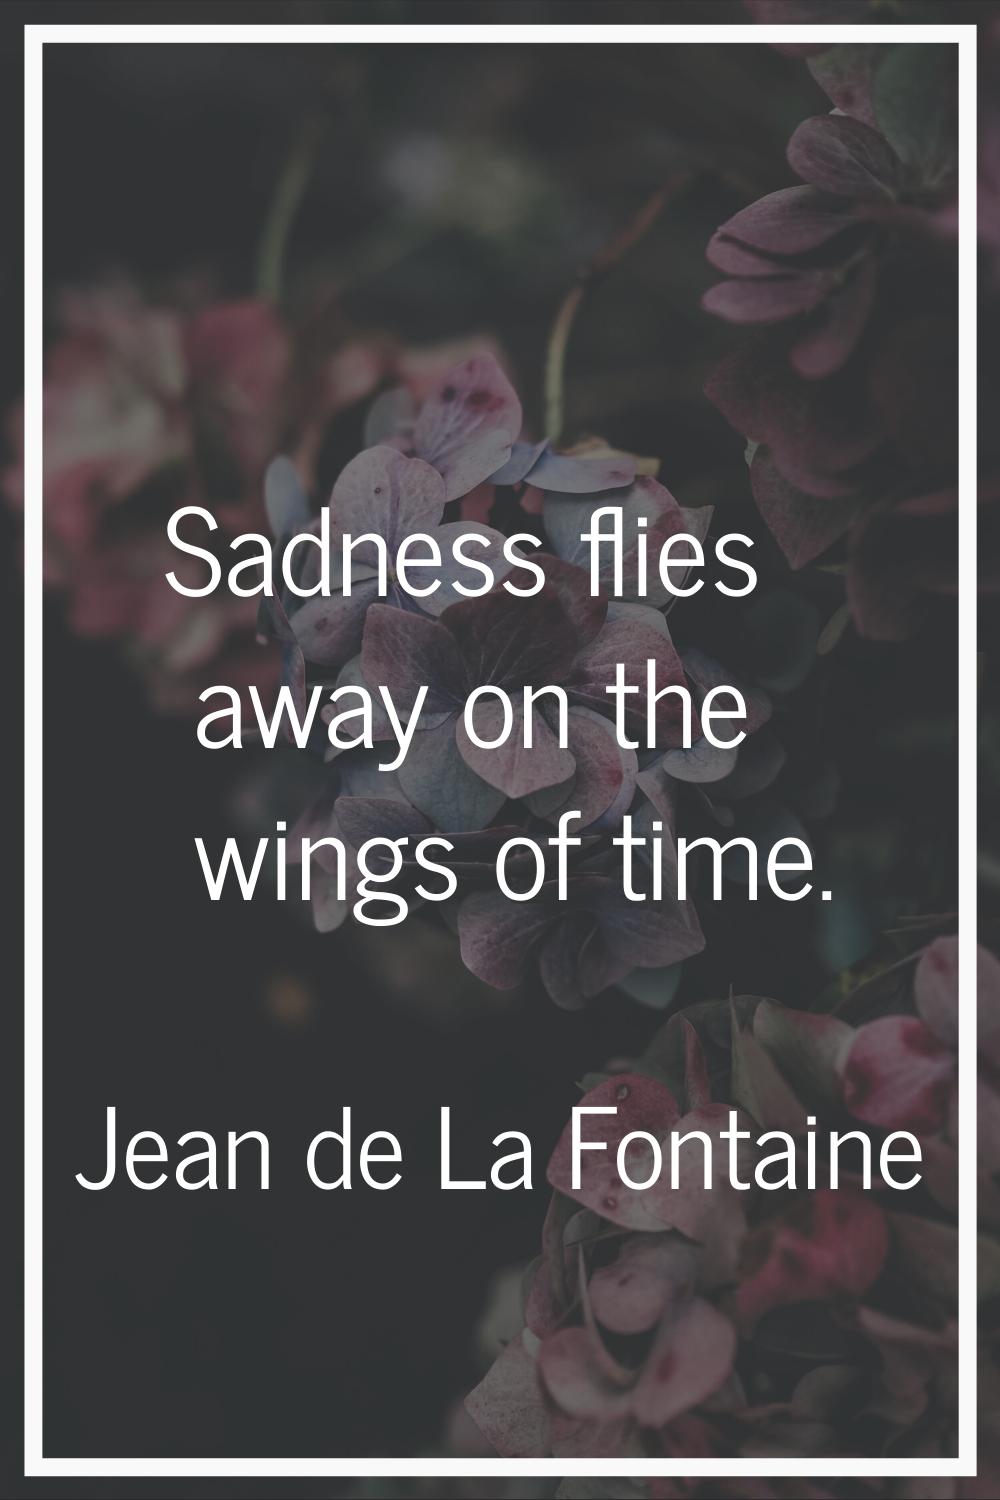 Sadness flies away on the wings of time.